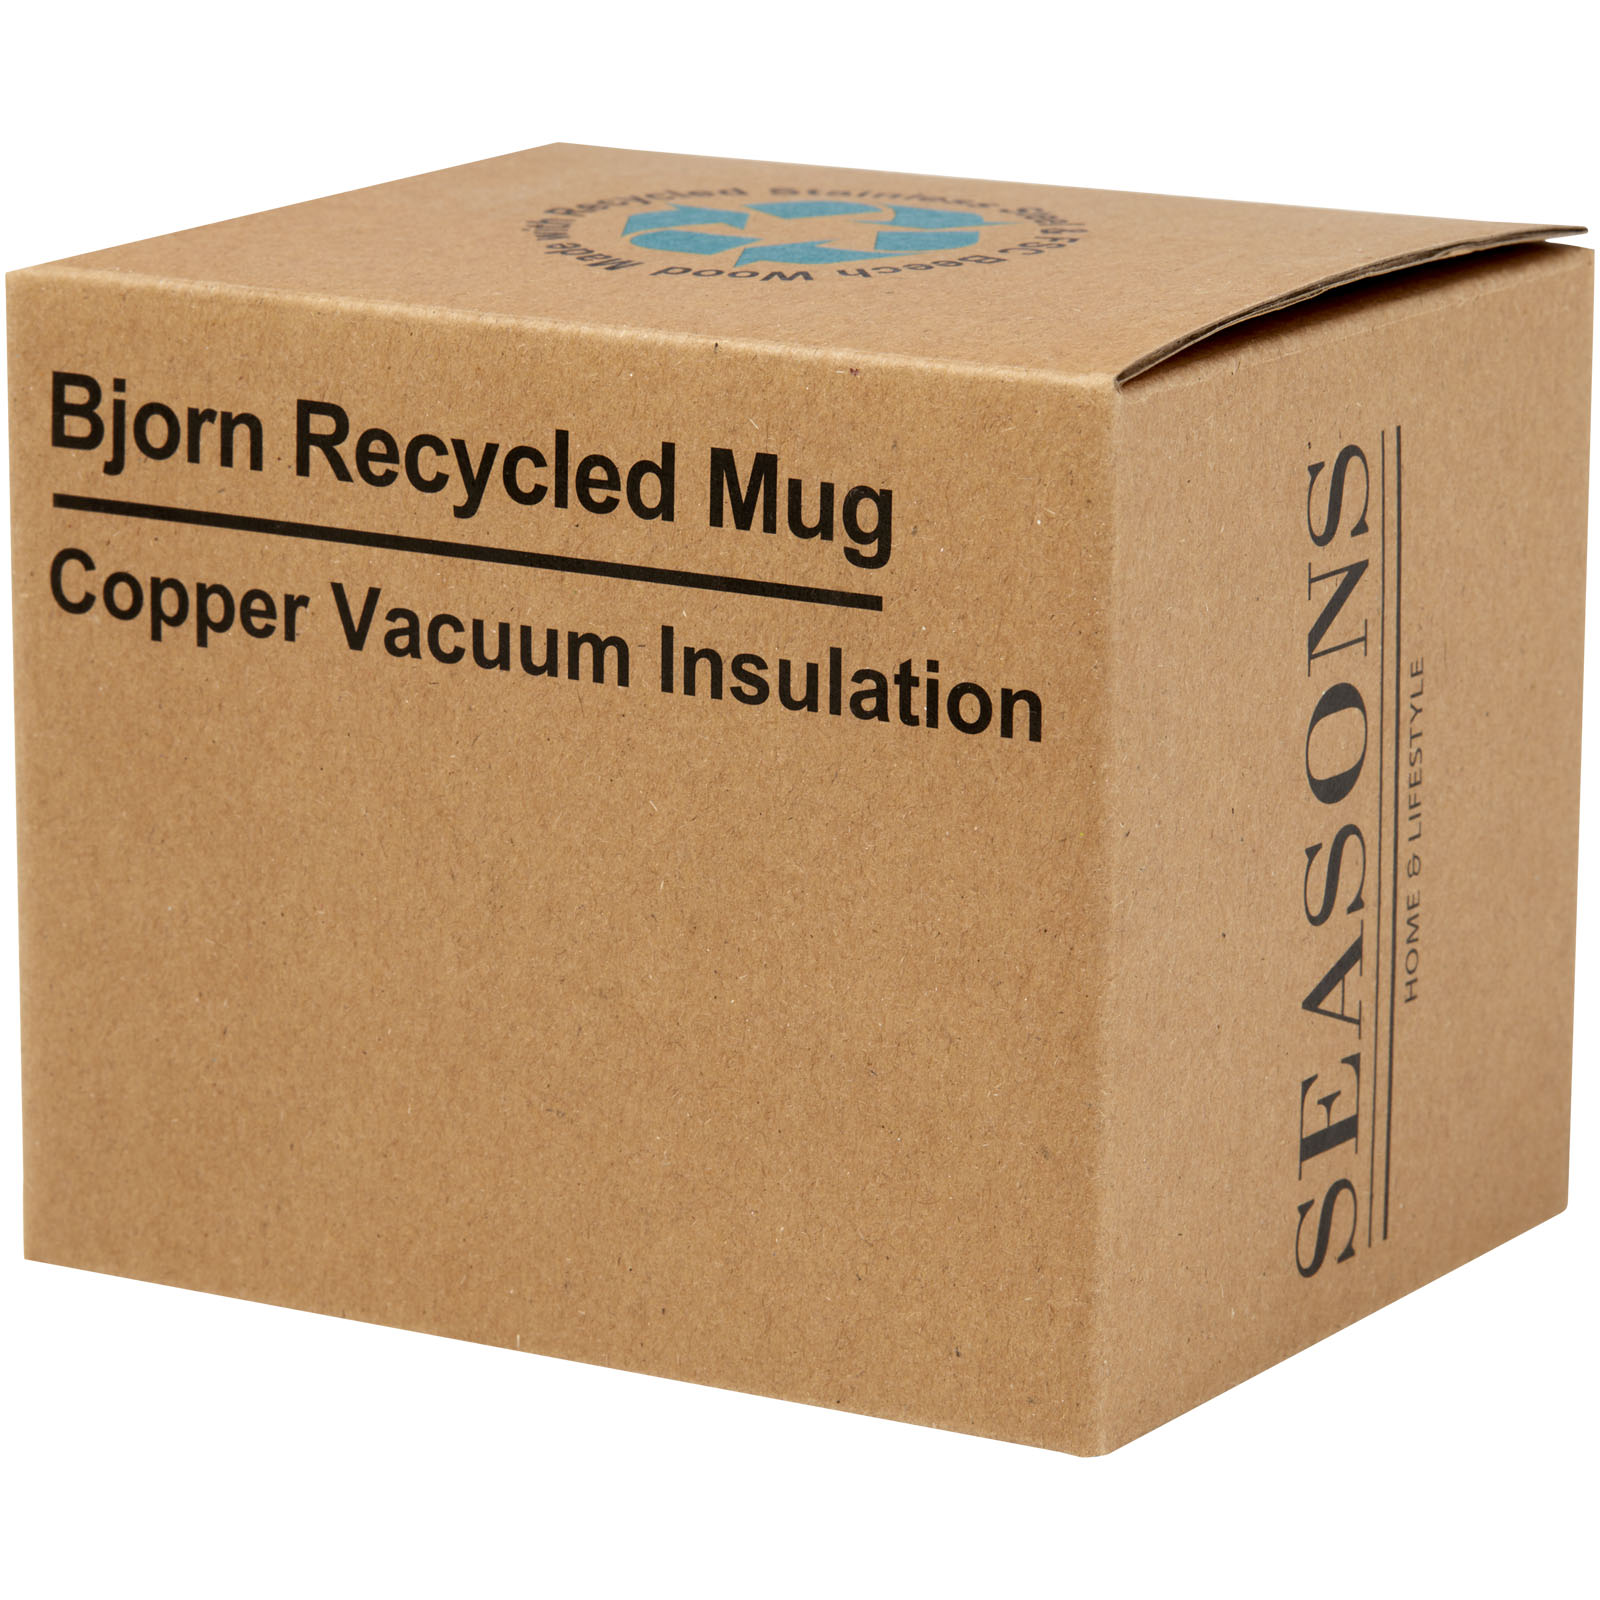 Advertising Insulated mugs - Bjorn 360 ml RCS certified recycled stainless steel mug with copper vacuum insulation - 1